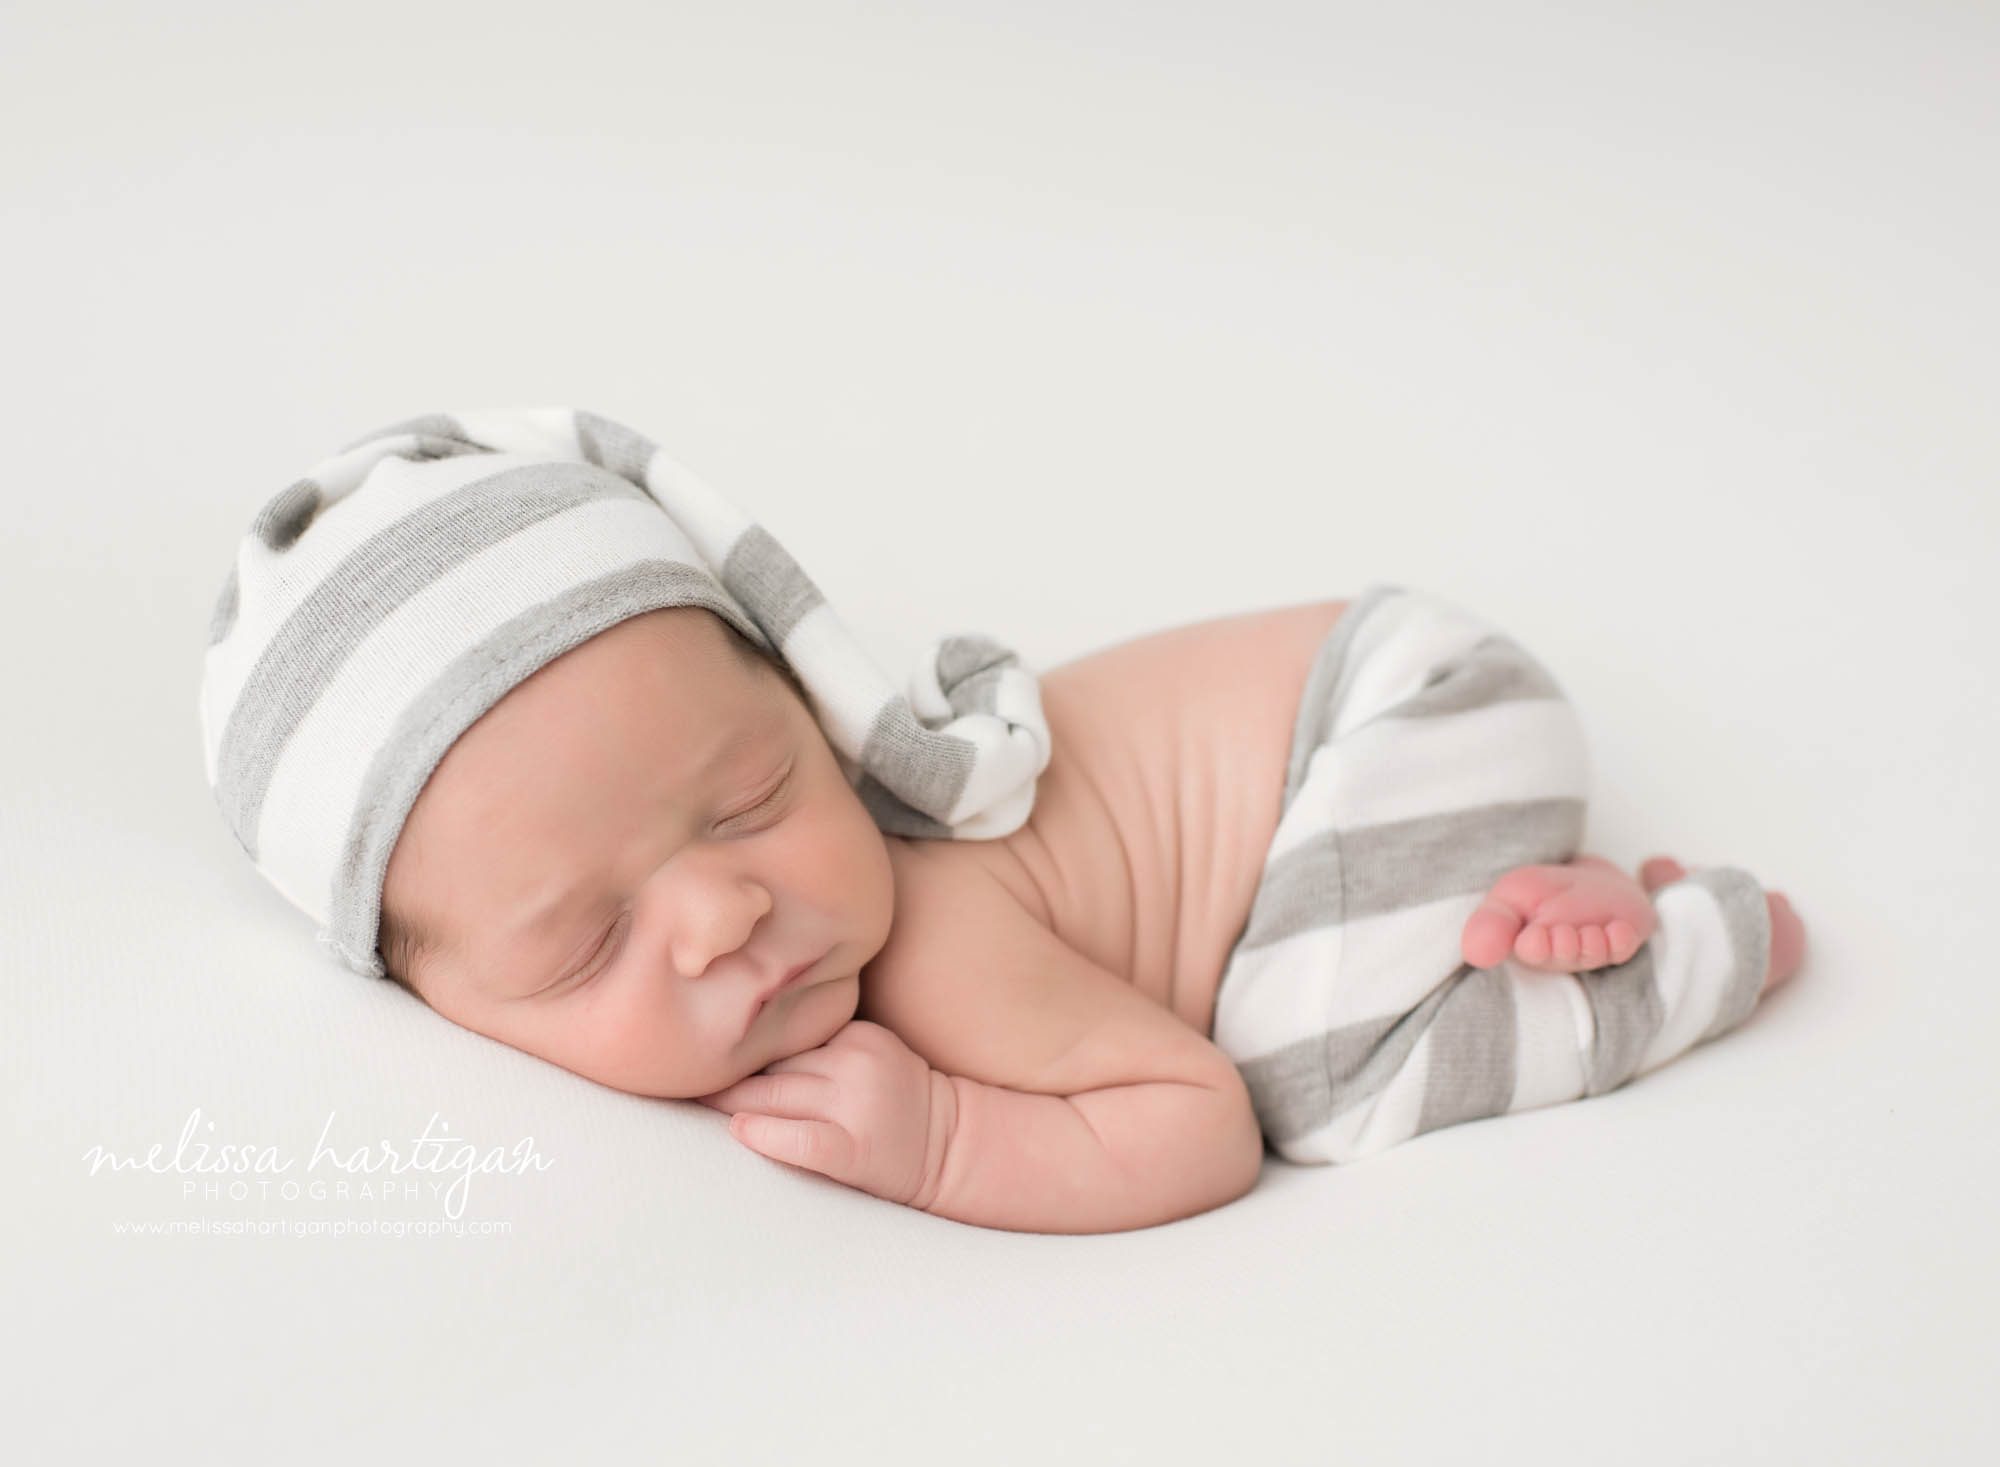 Newborn baby boy posed on tummy wearing white and gray striped sleepy cap and pants Connecticut Newborn Photography